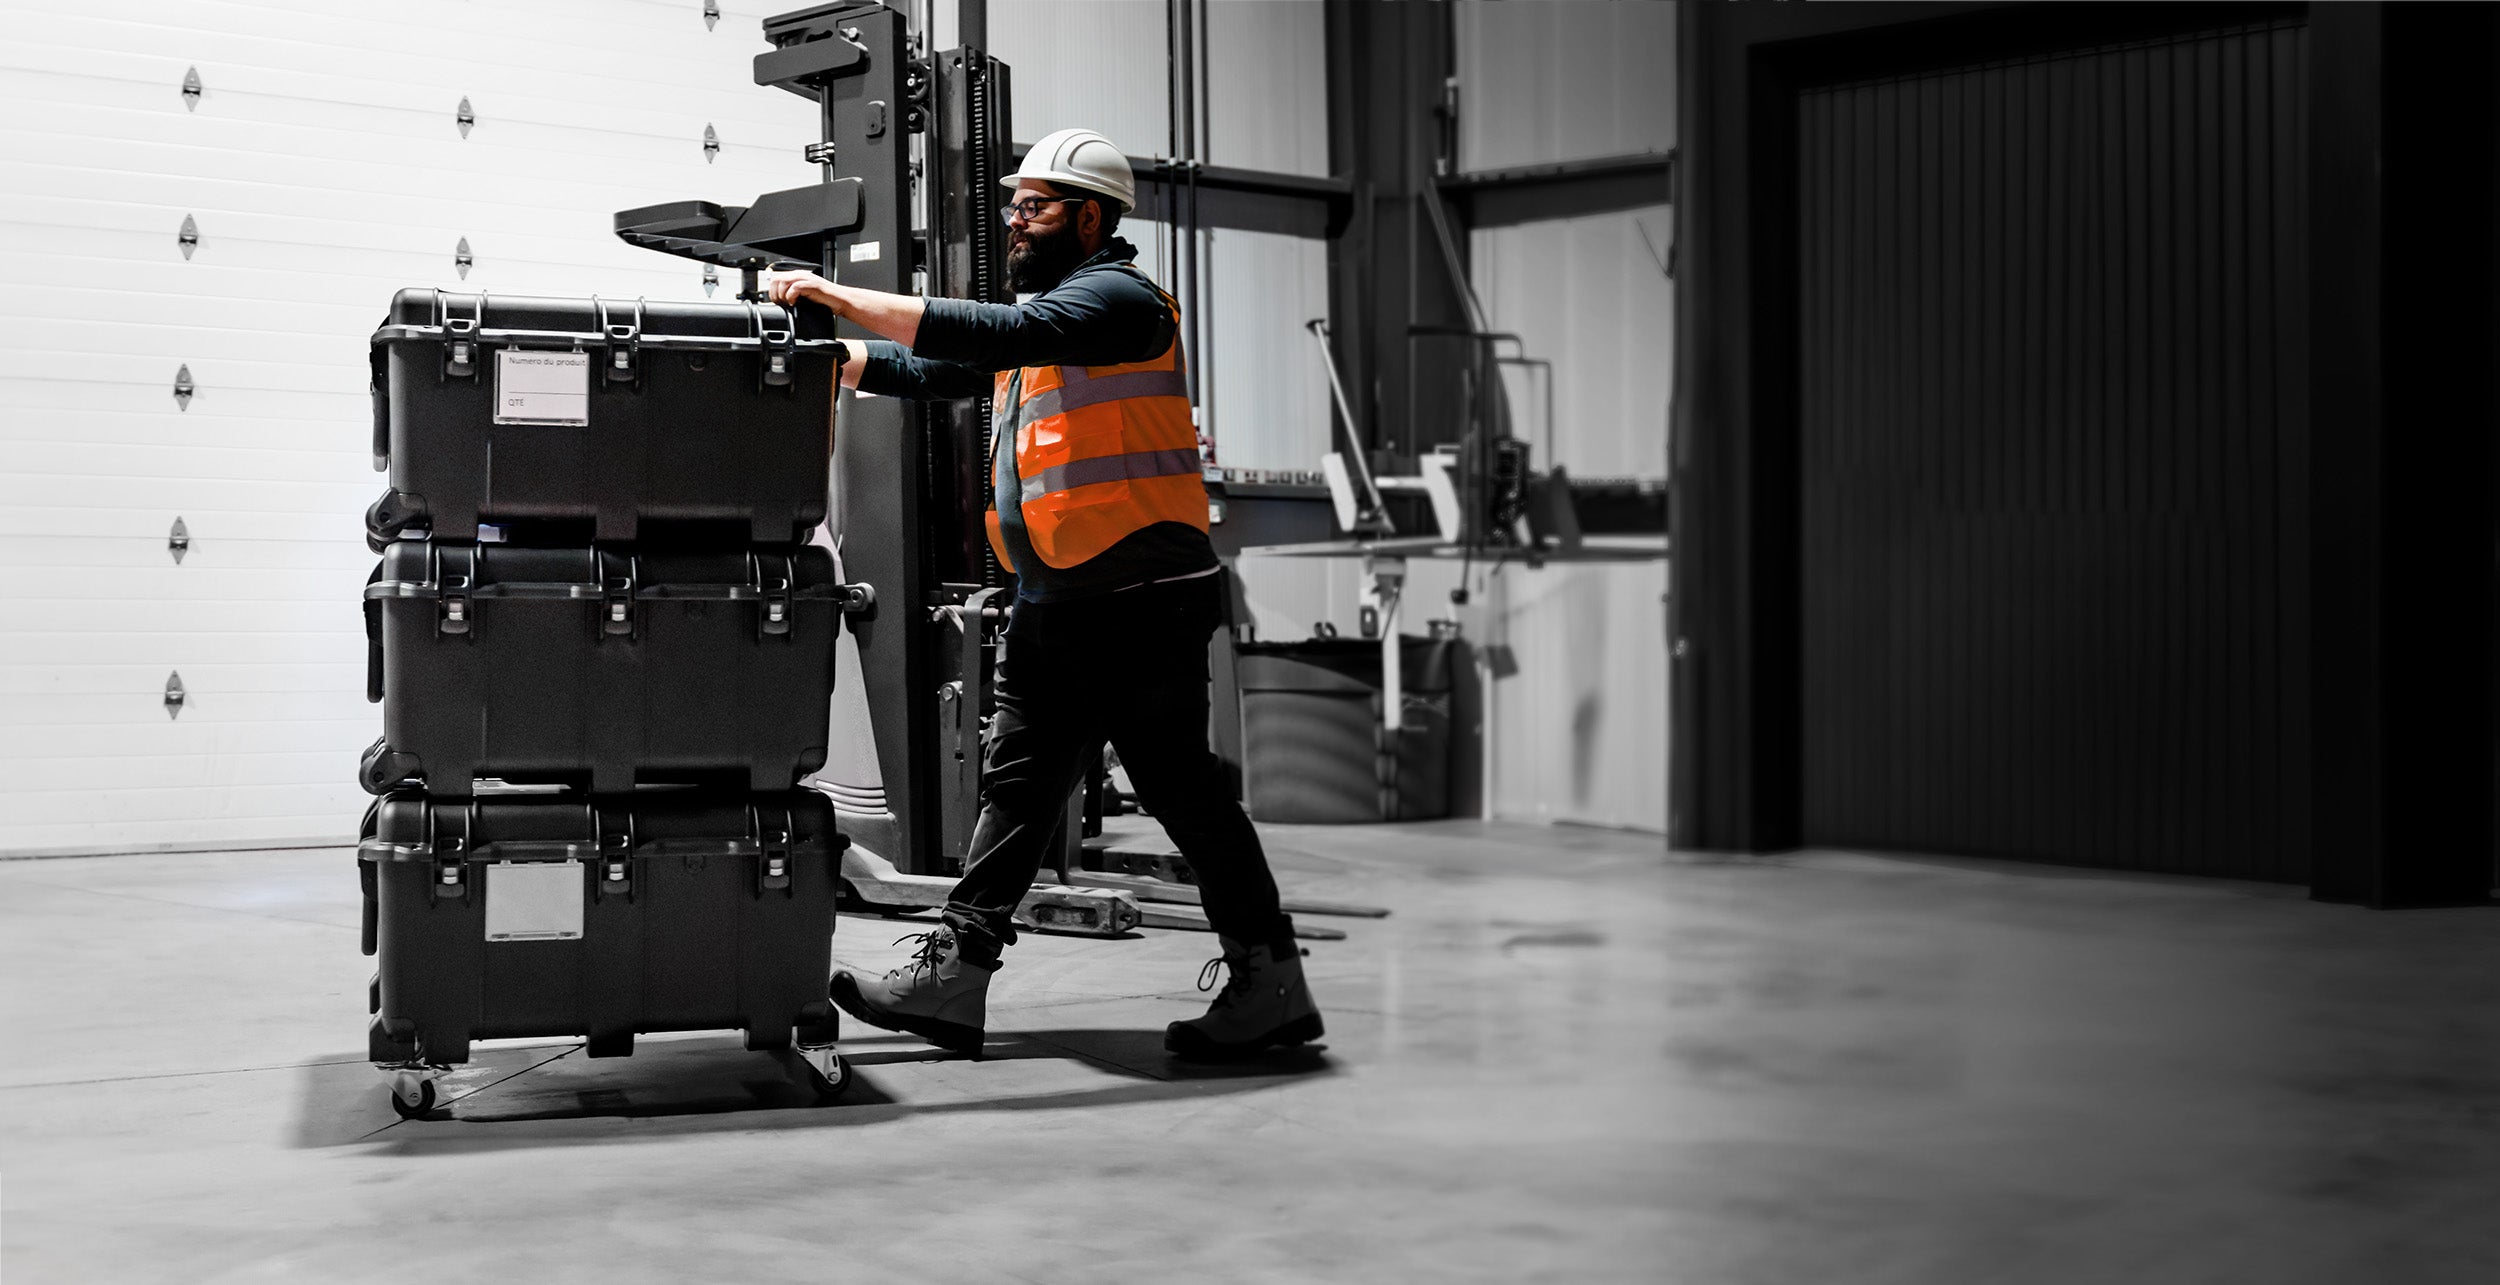 NANUK hard cases are equipped with features like wheels, which are beneficial for industries where workers are frequently on the move, ensuring easy transportation of tools and equipment to project sites.